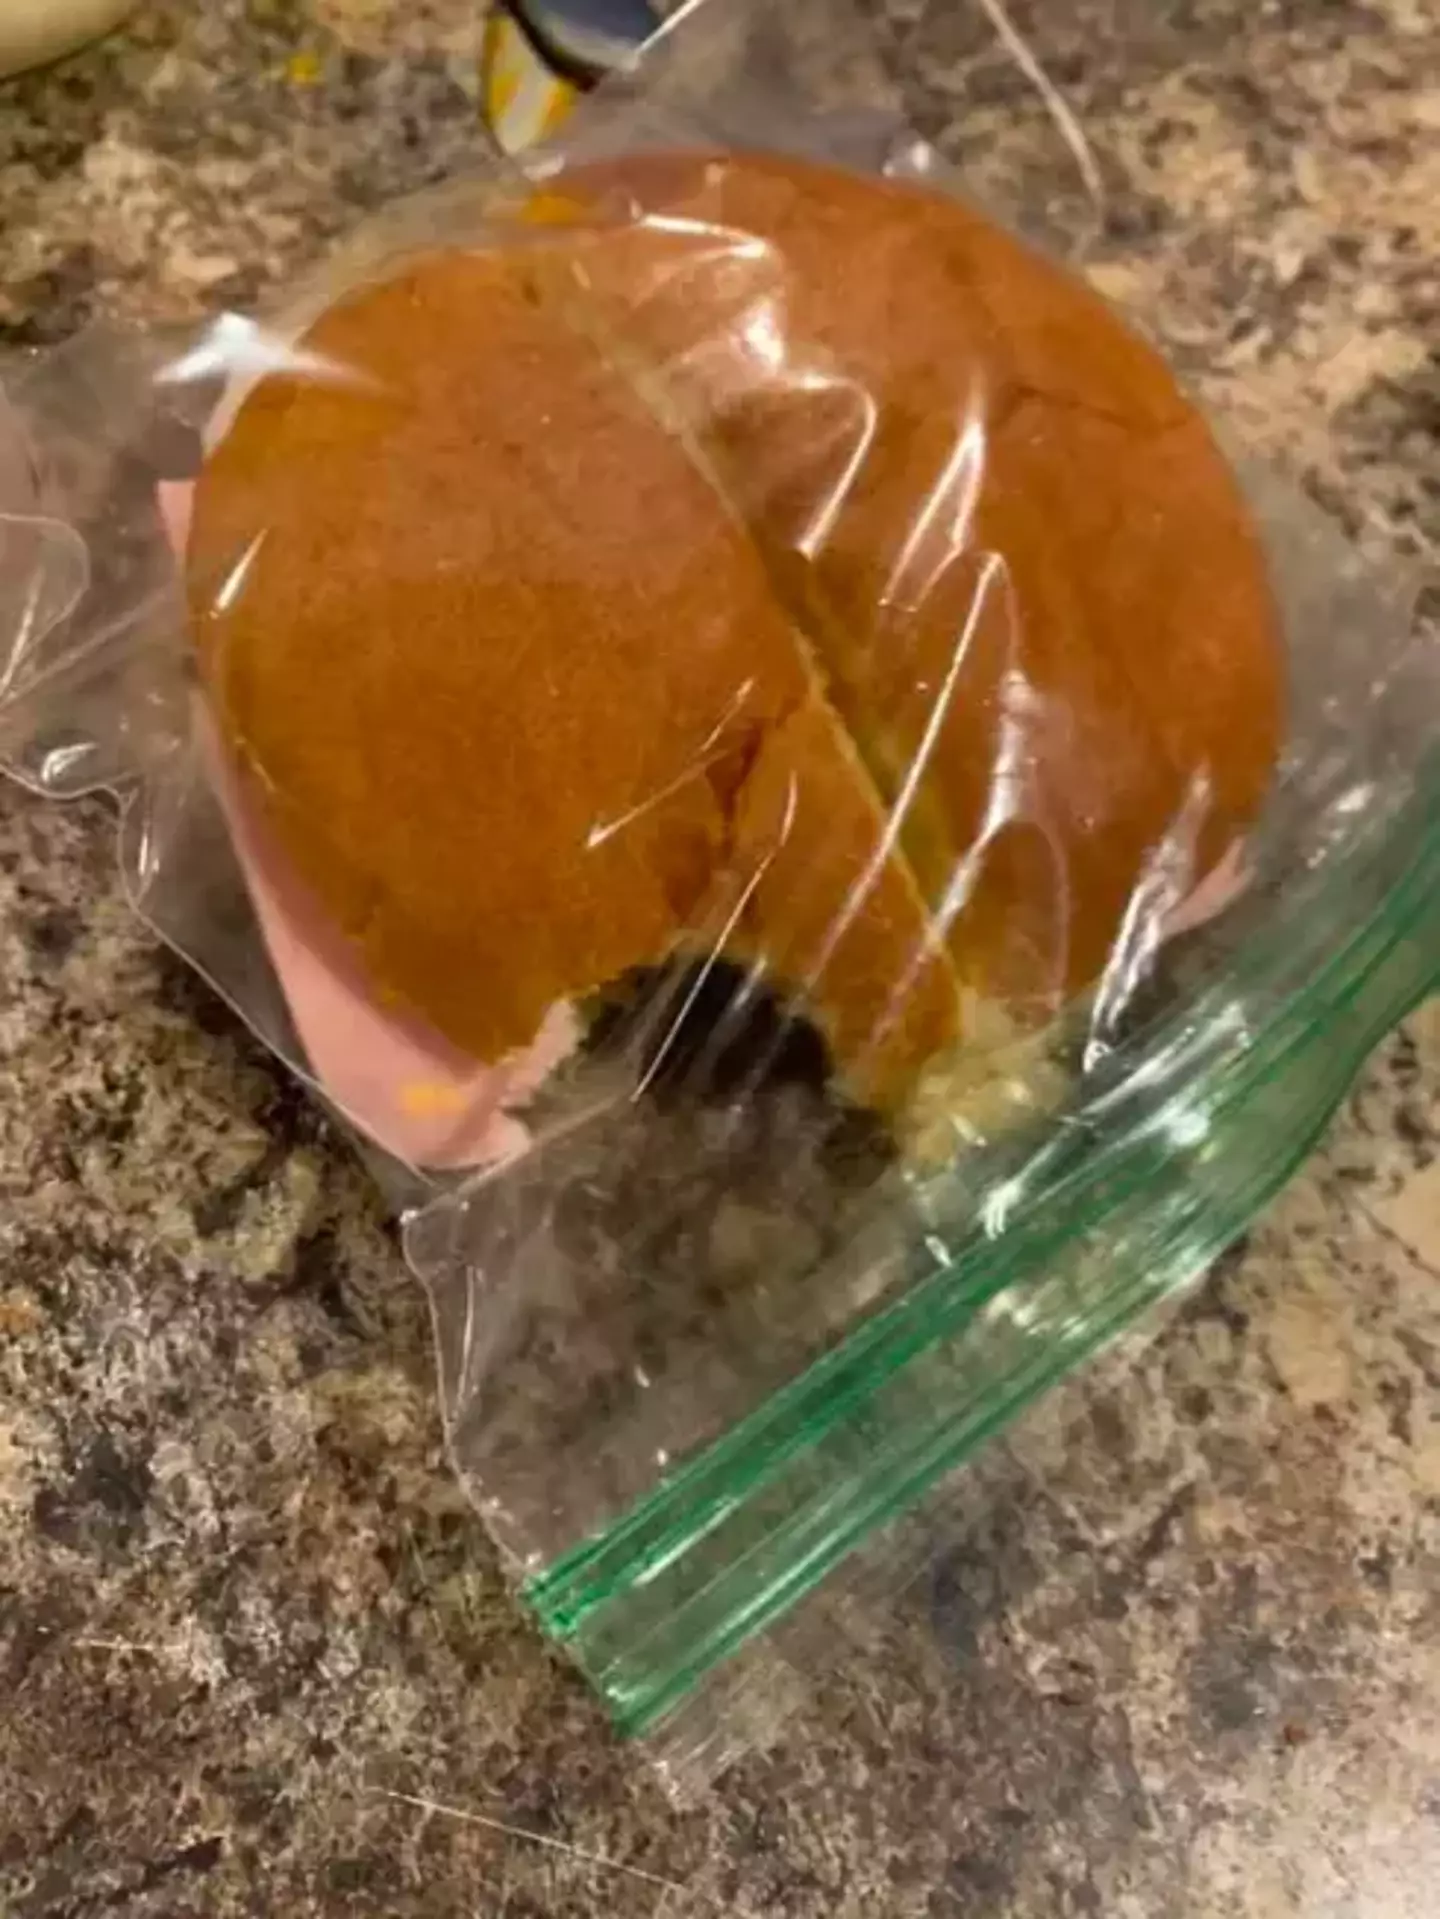 This is why Tracy eats a bite out of her husband's sandwich.